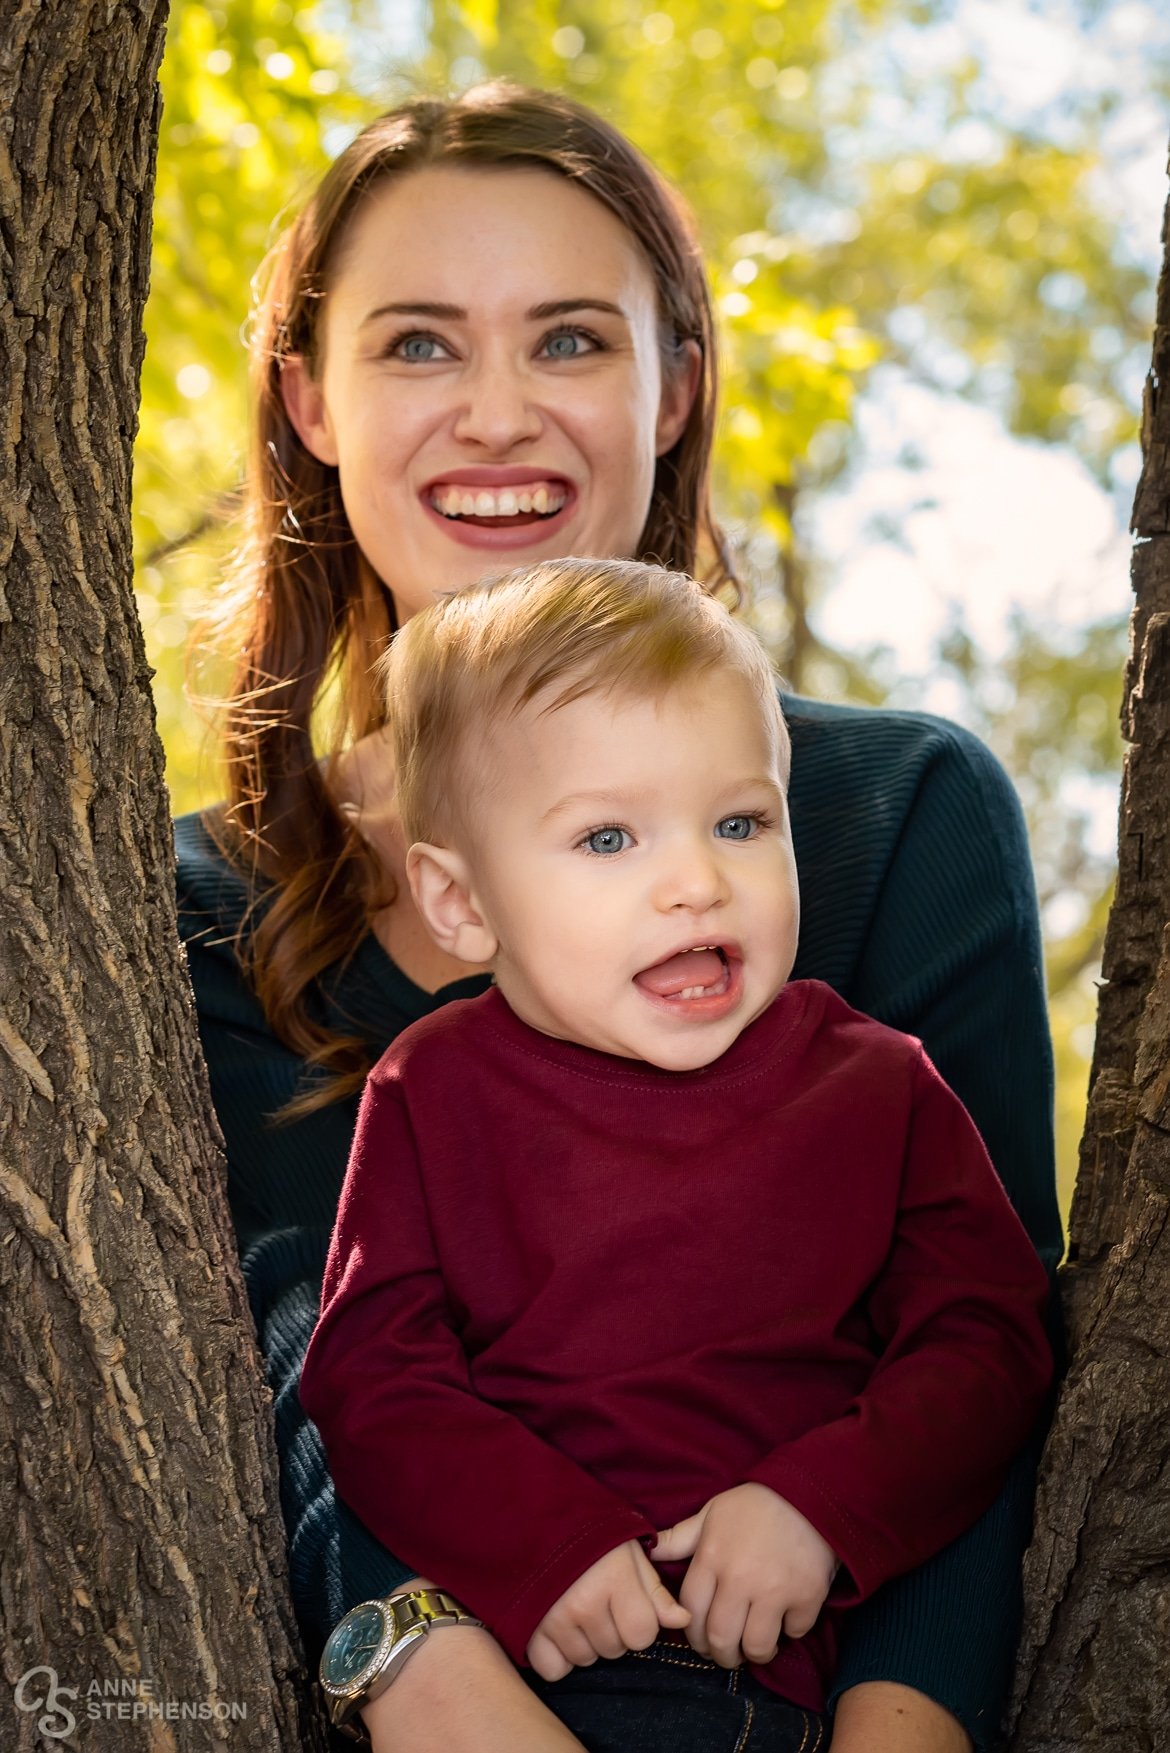 A mother and son between tree branches at their portrait session.